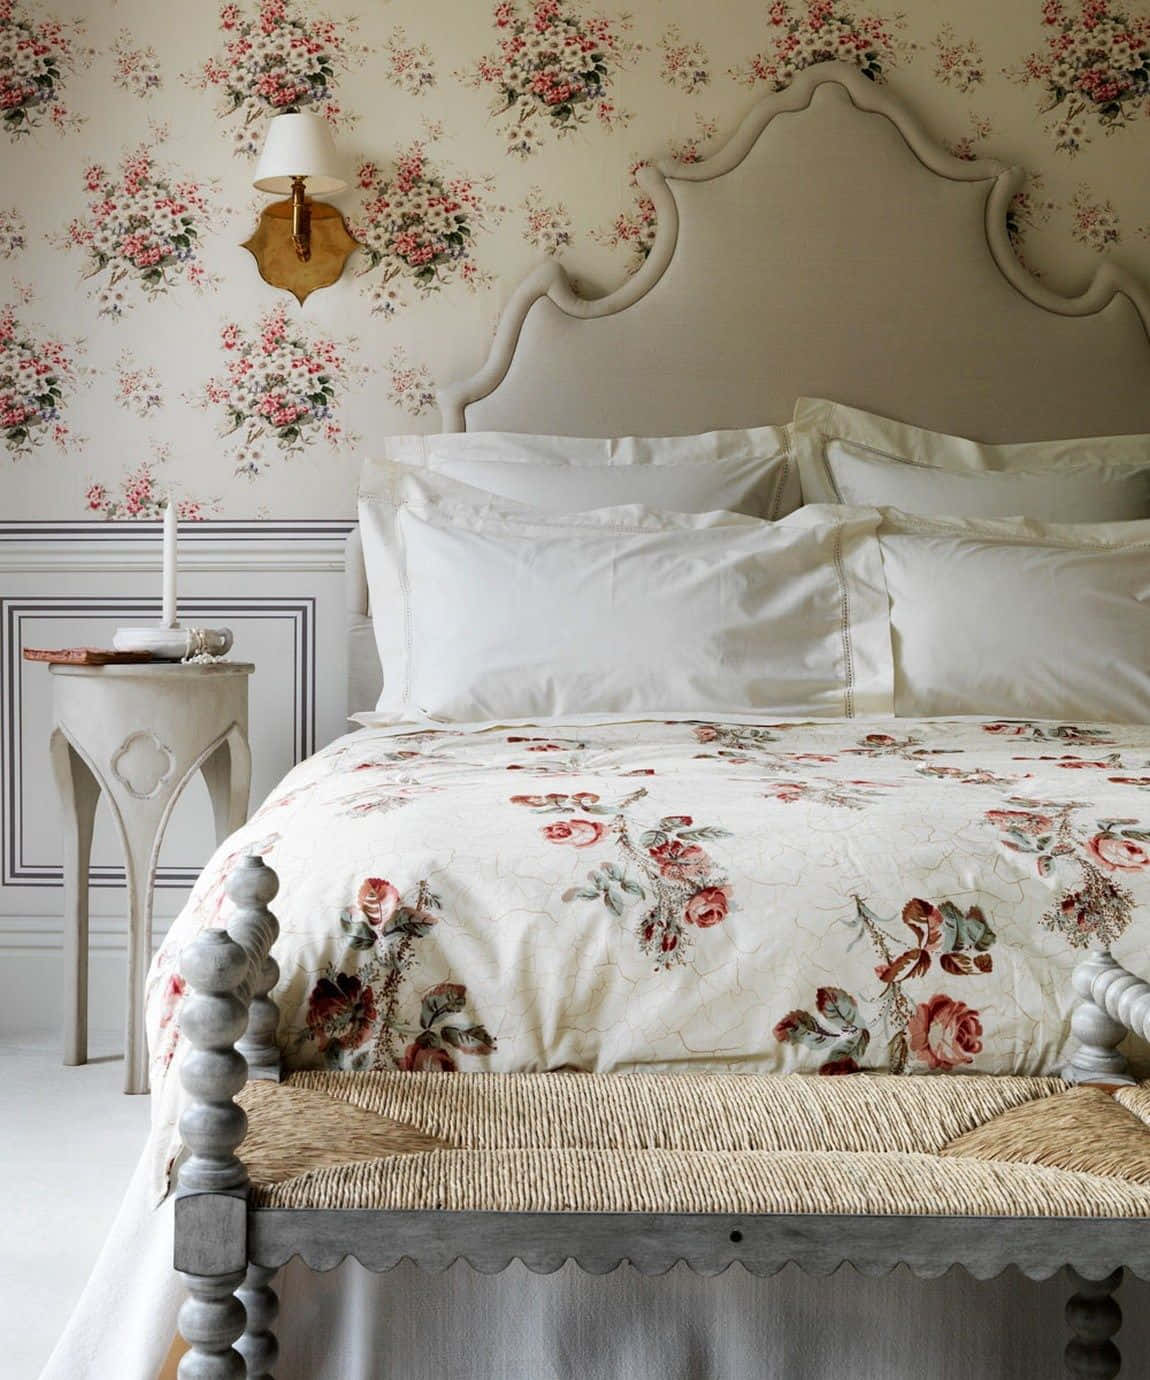 Floral Bed Linen And Wall Wallpaper